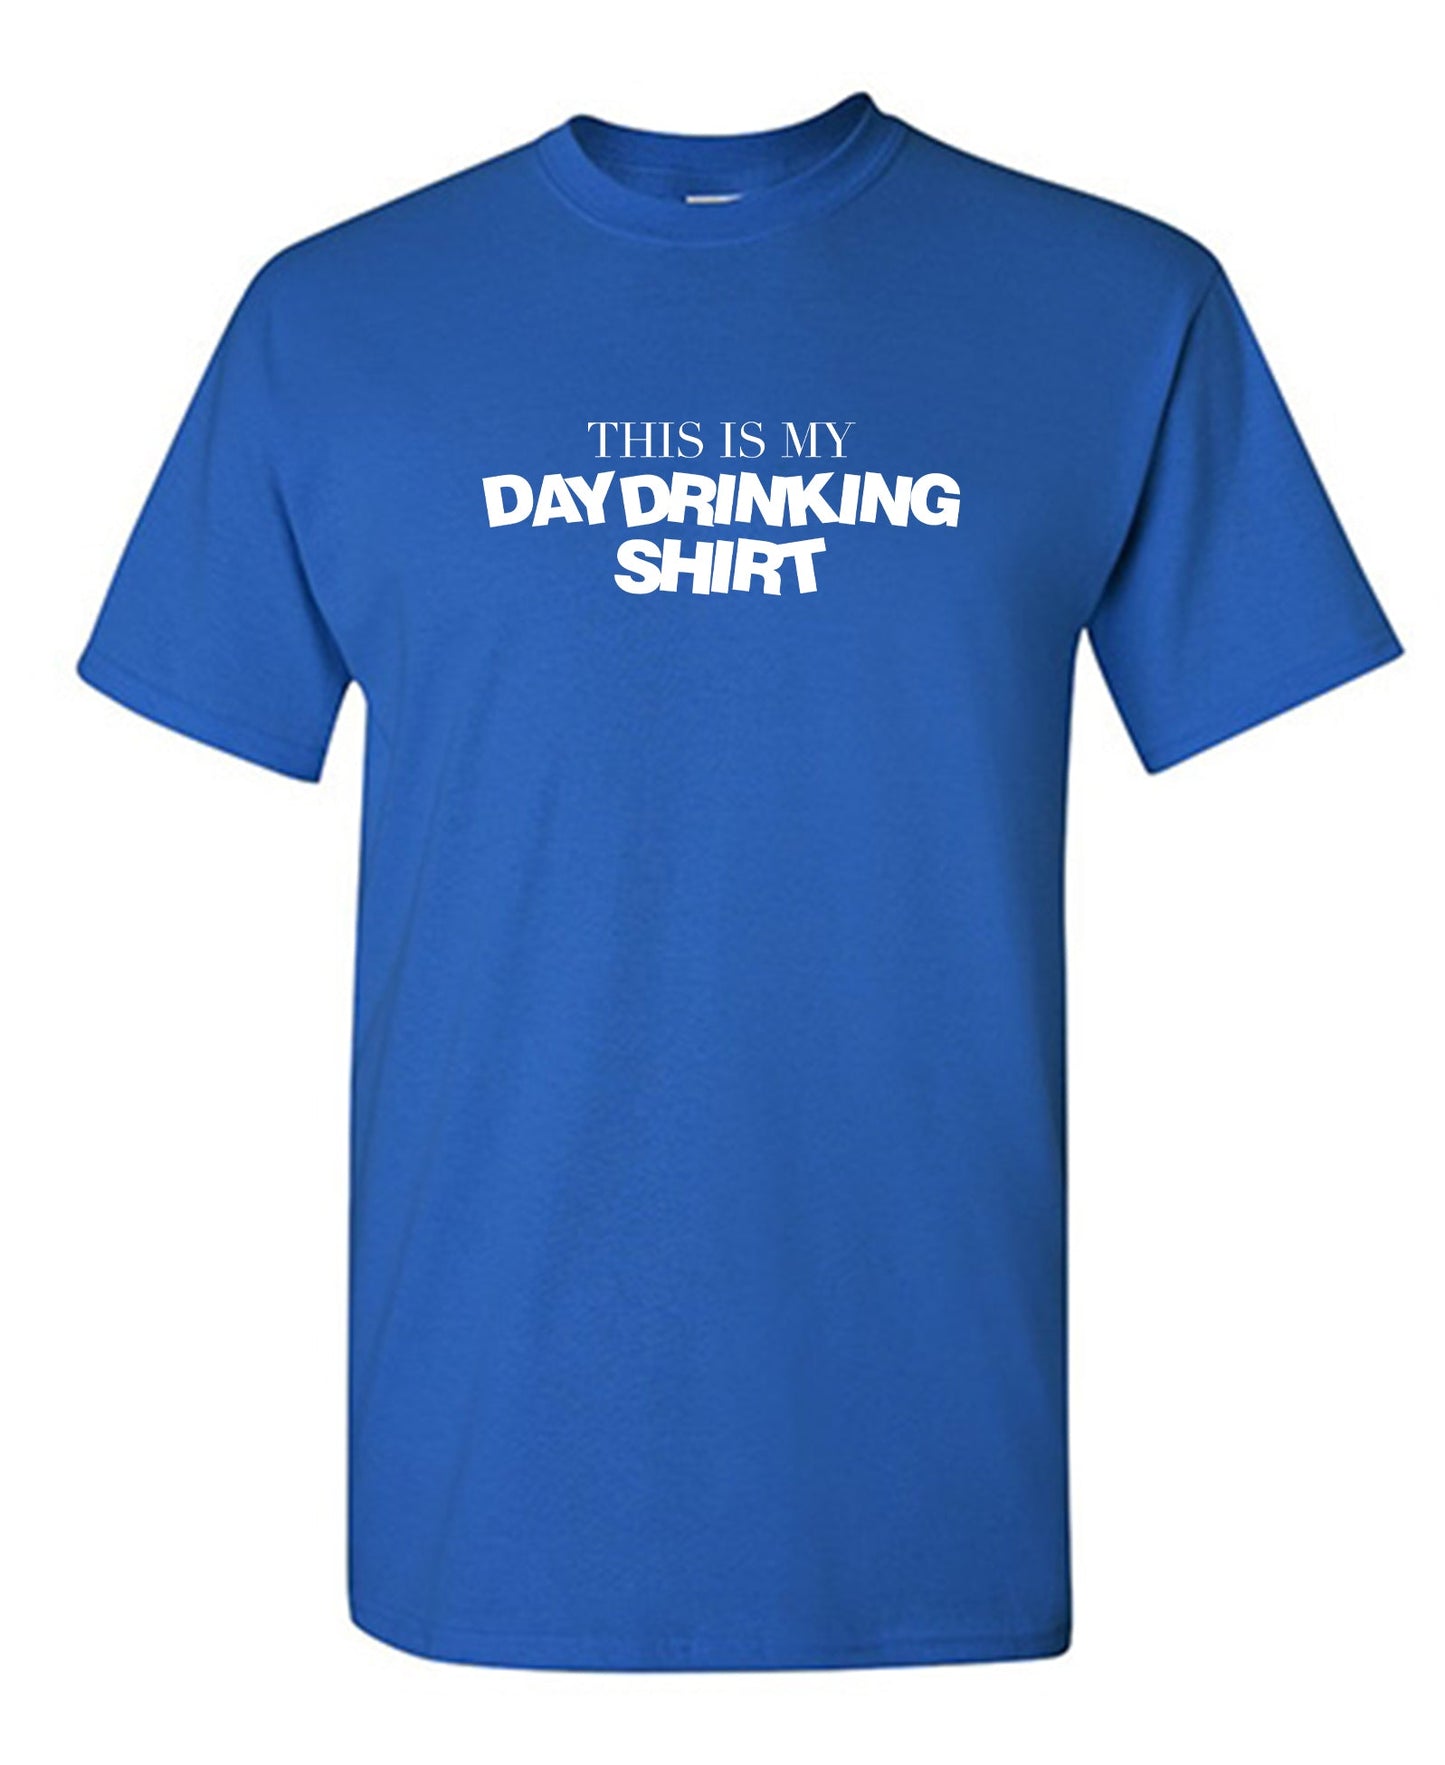 This is My Day Drinking Shirt